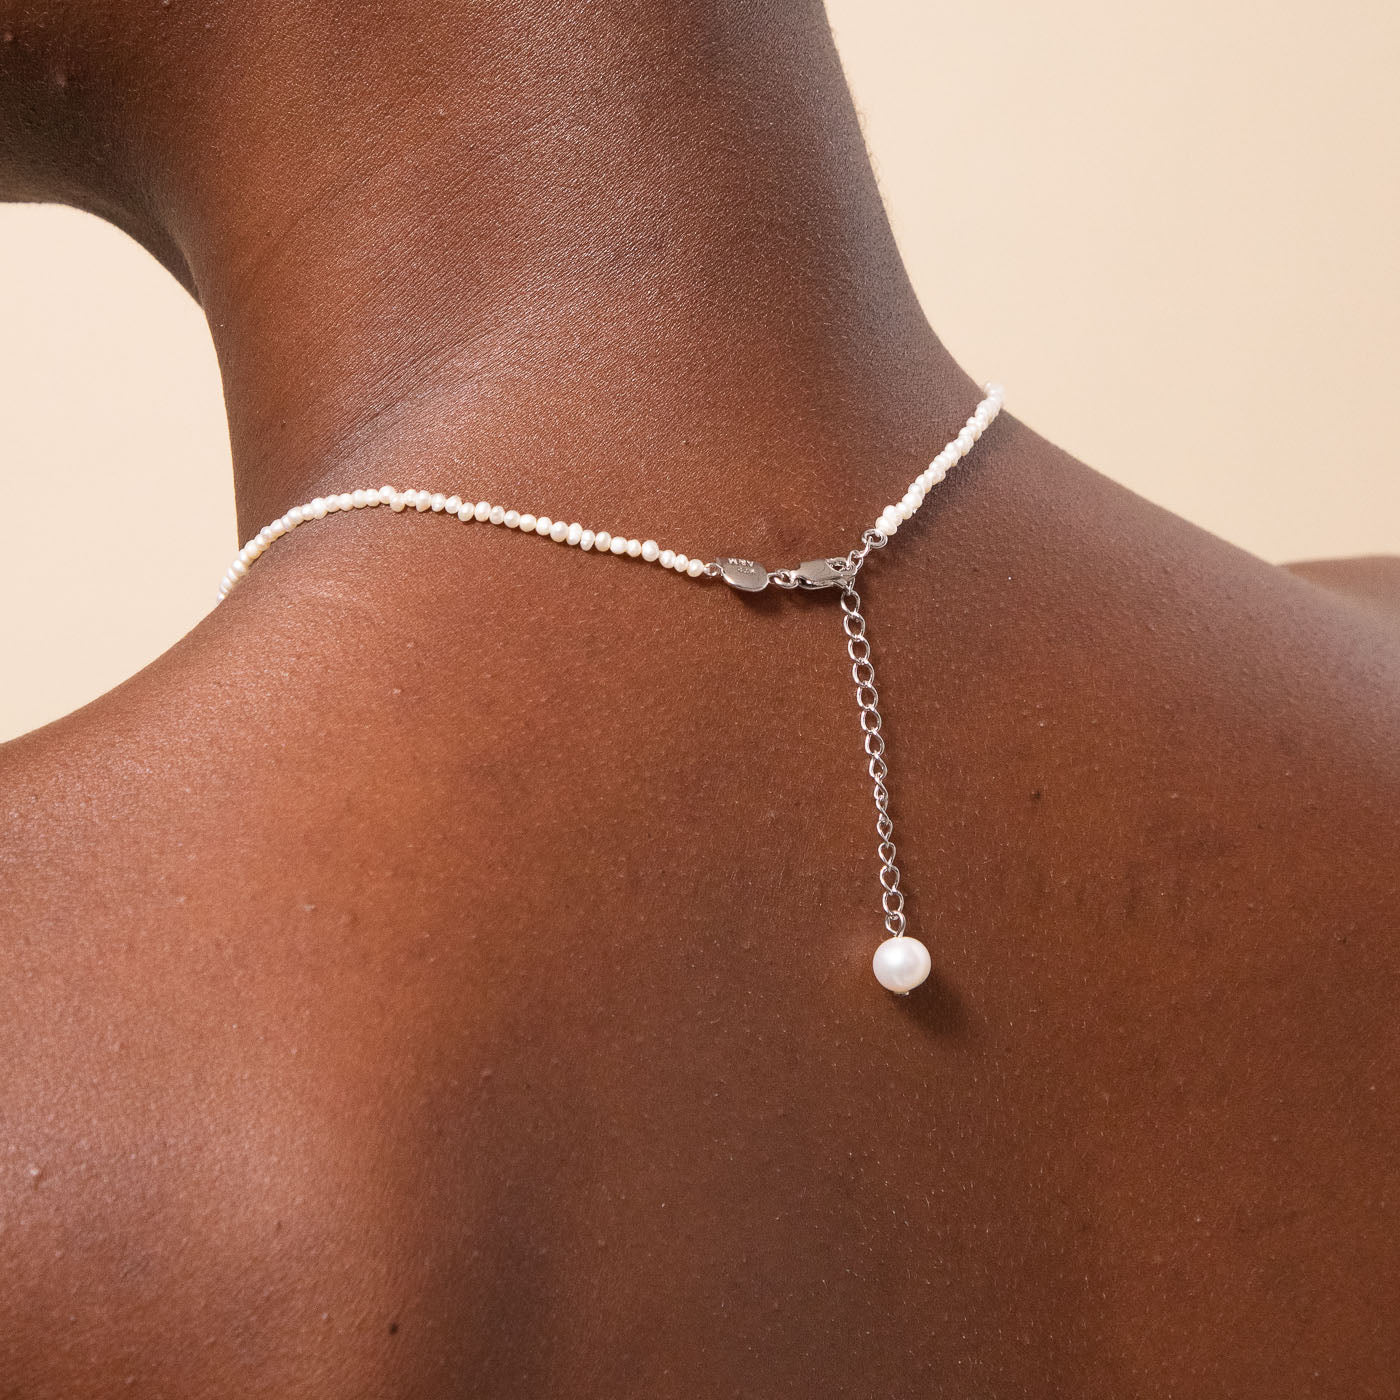 Radiant Pearl Necklace in Silver back worn